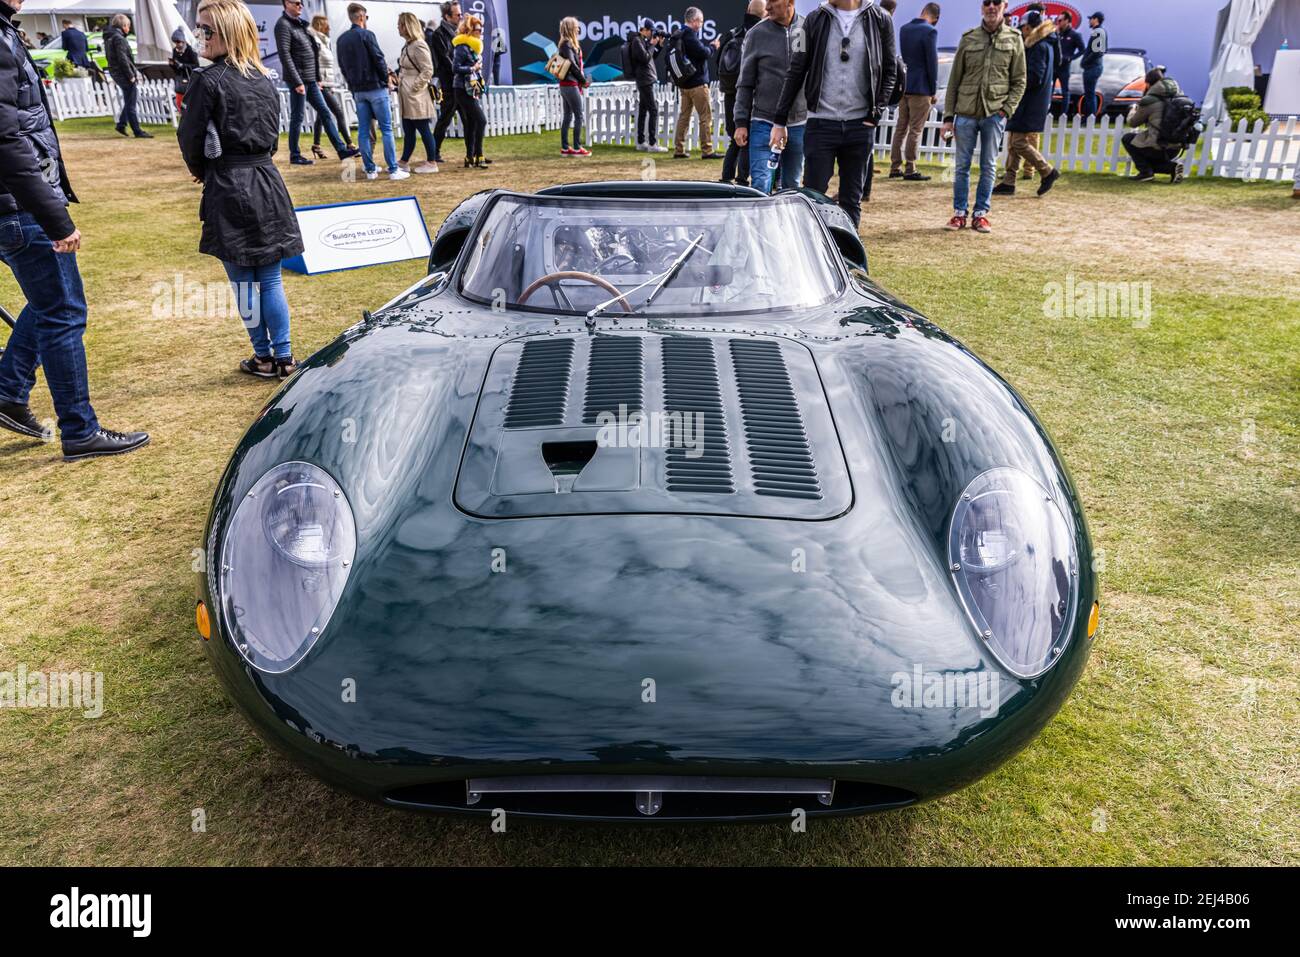 Building The Legend - Jaguar XJ13 Le Mans Prototype on show at the Concours d’Elegance held at Blenheim Palace on the 26 September 2020 Stock Photo